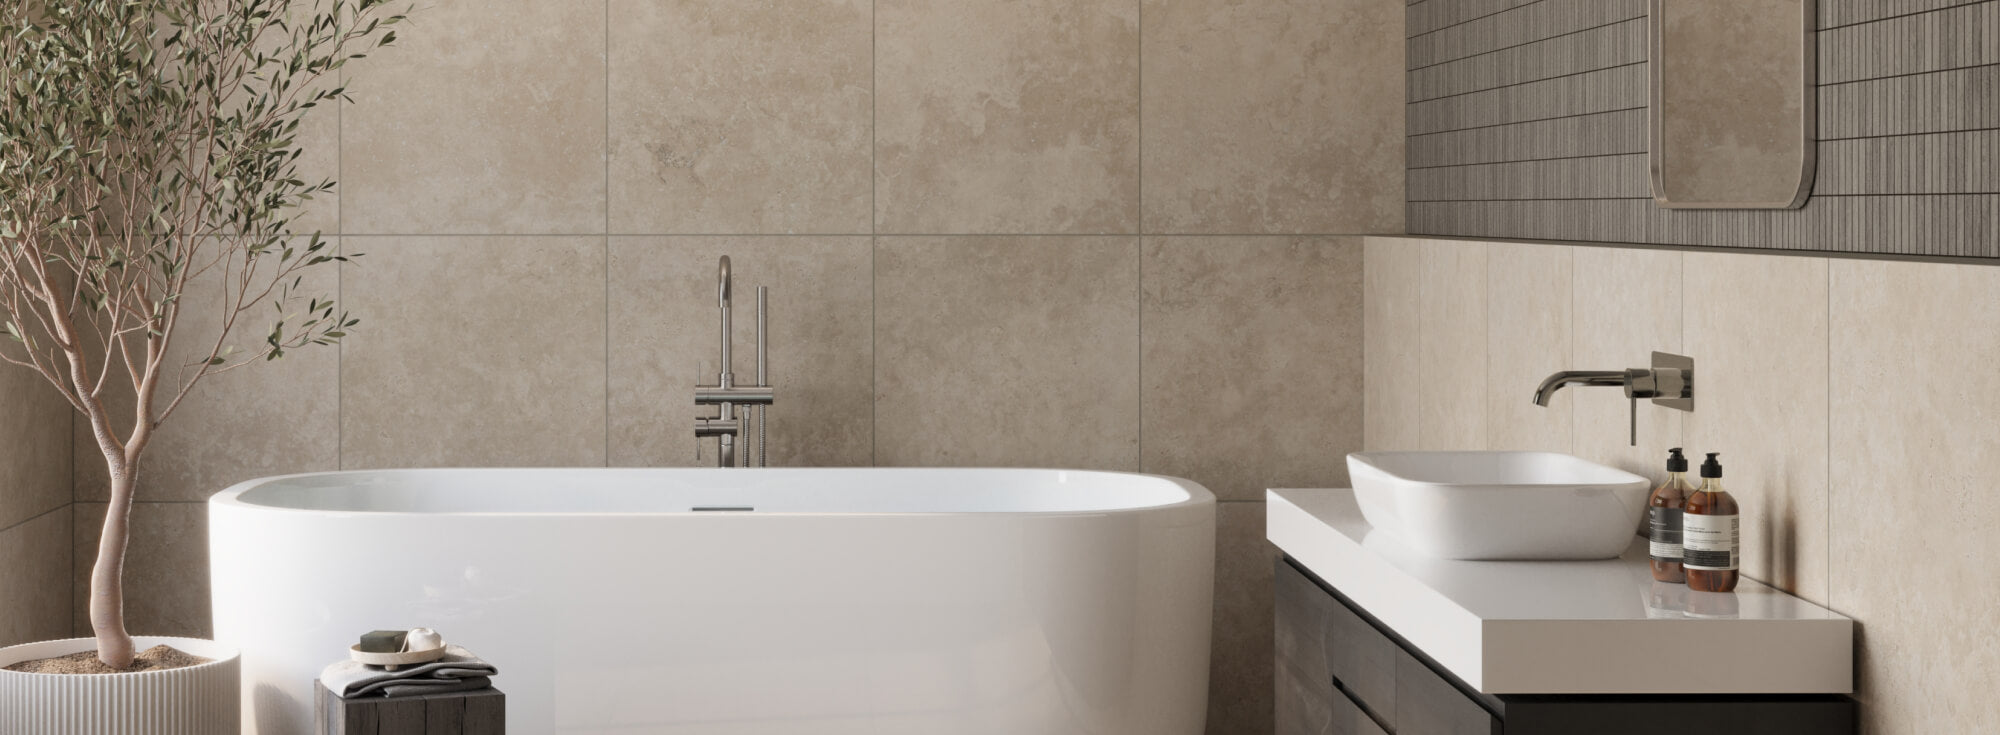 Luxurious bathroom with large format tiles, creating a spacious and grandeur ambiance with sleek elegance.